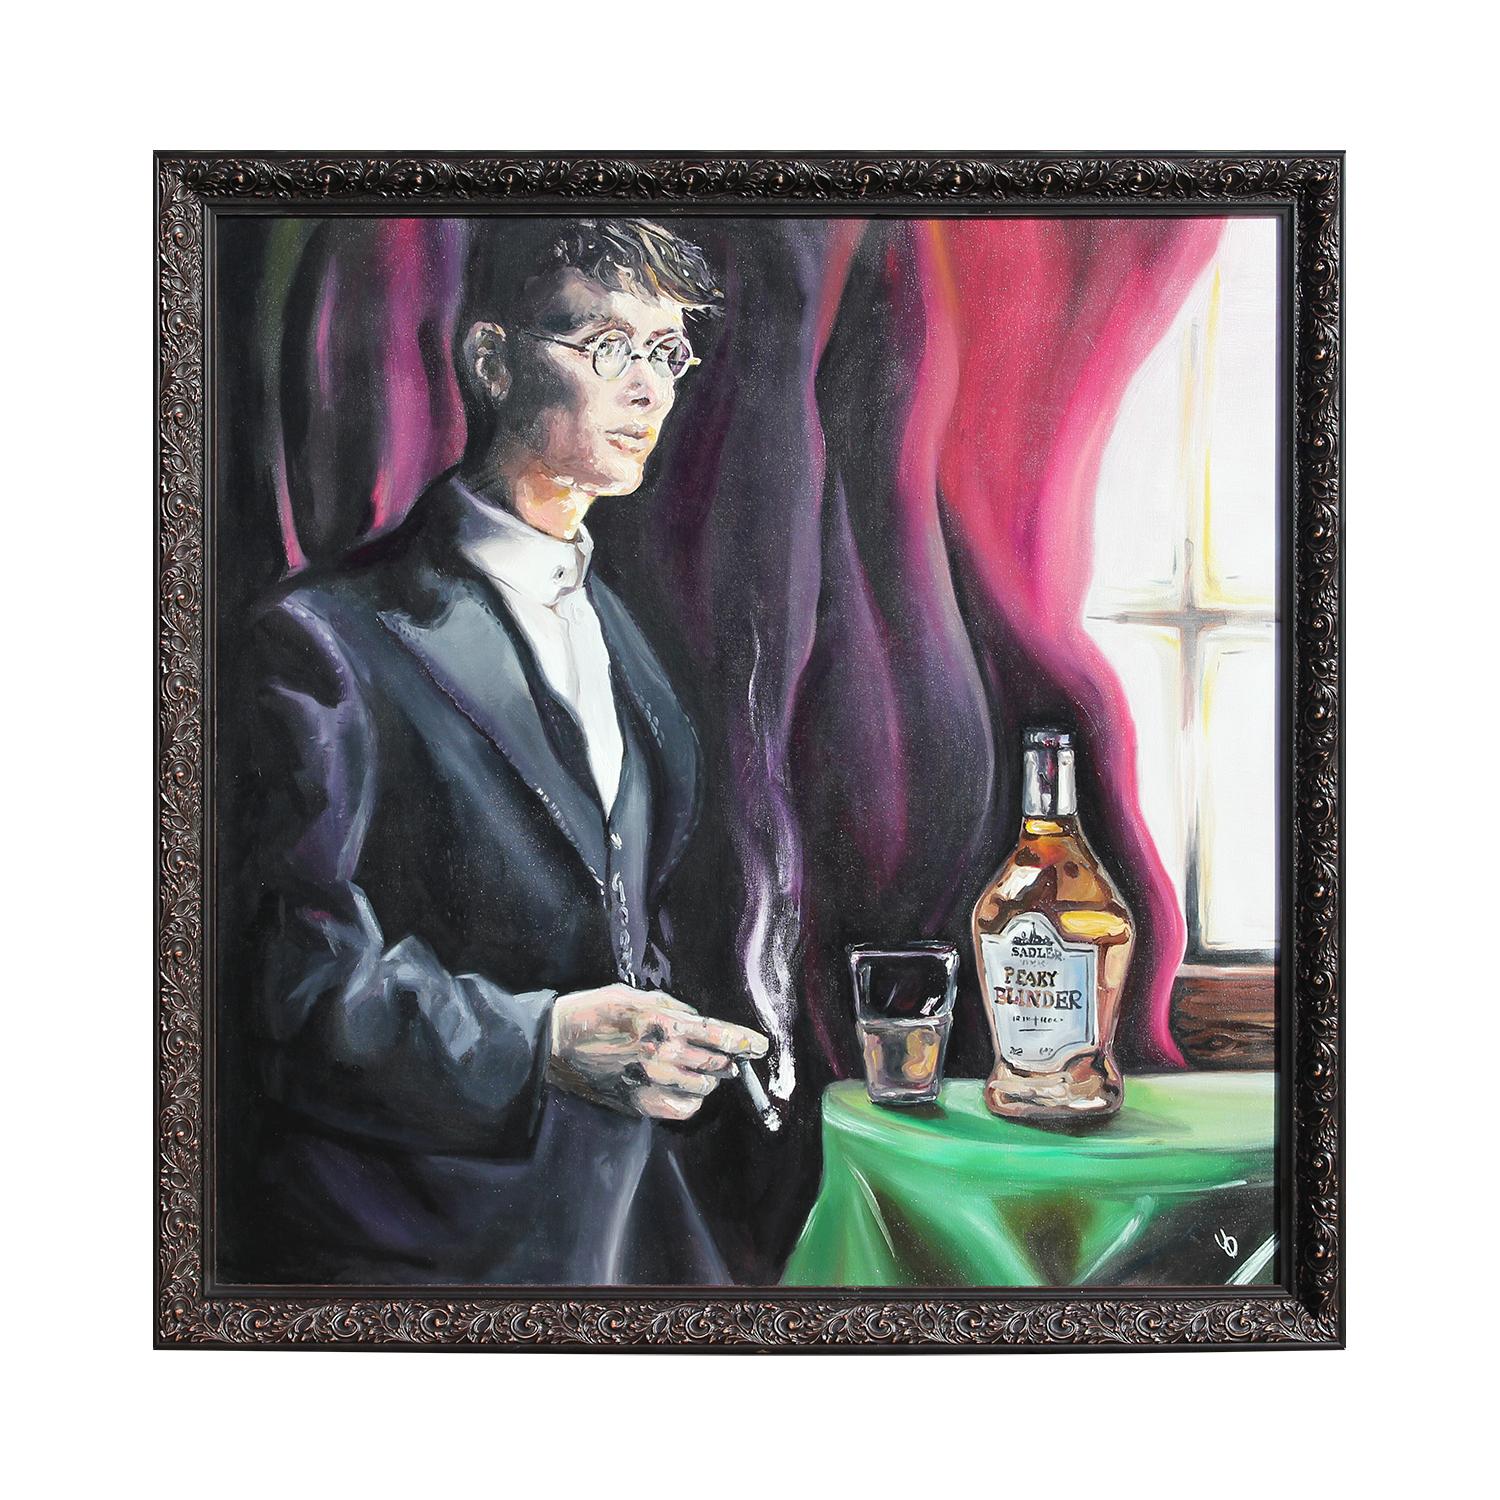 Realistic Portrait of Thomas Shelby (Cillian Murphy) from Peaky Blinders - Painting by YAG